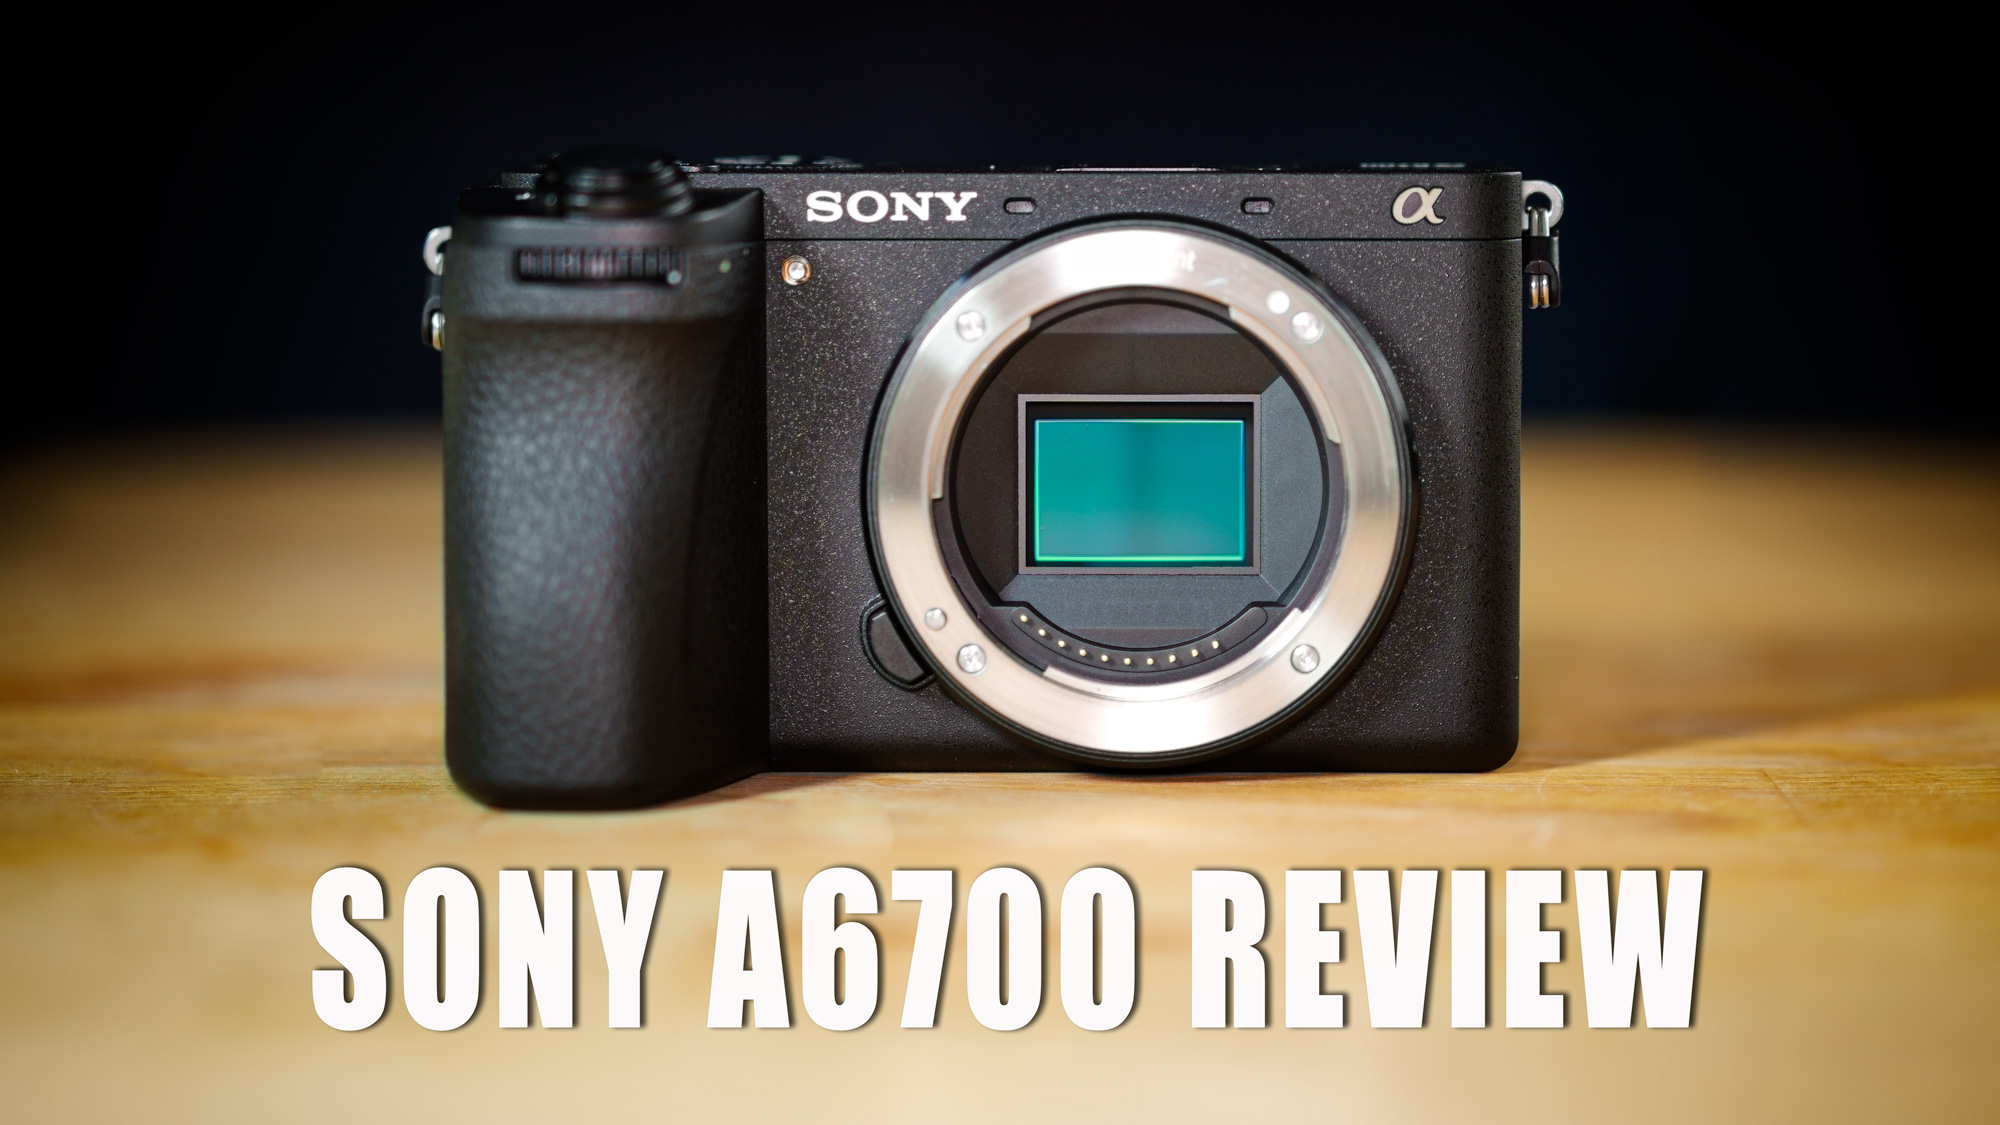 Sony A6700 Review - From A Real World Perspective